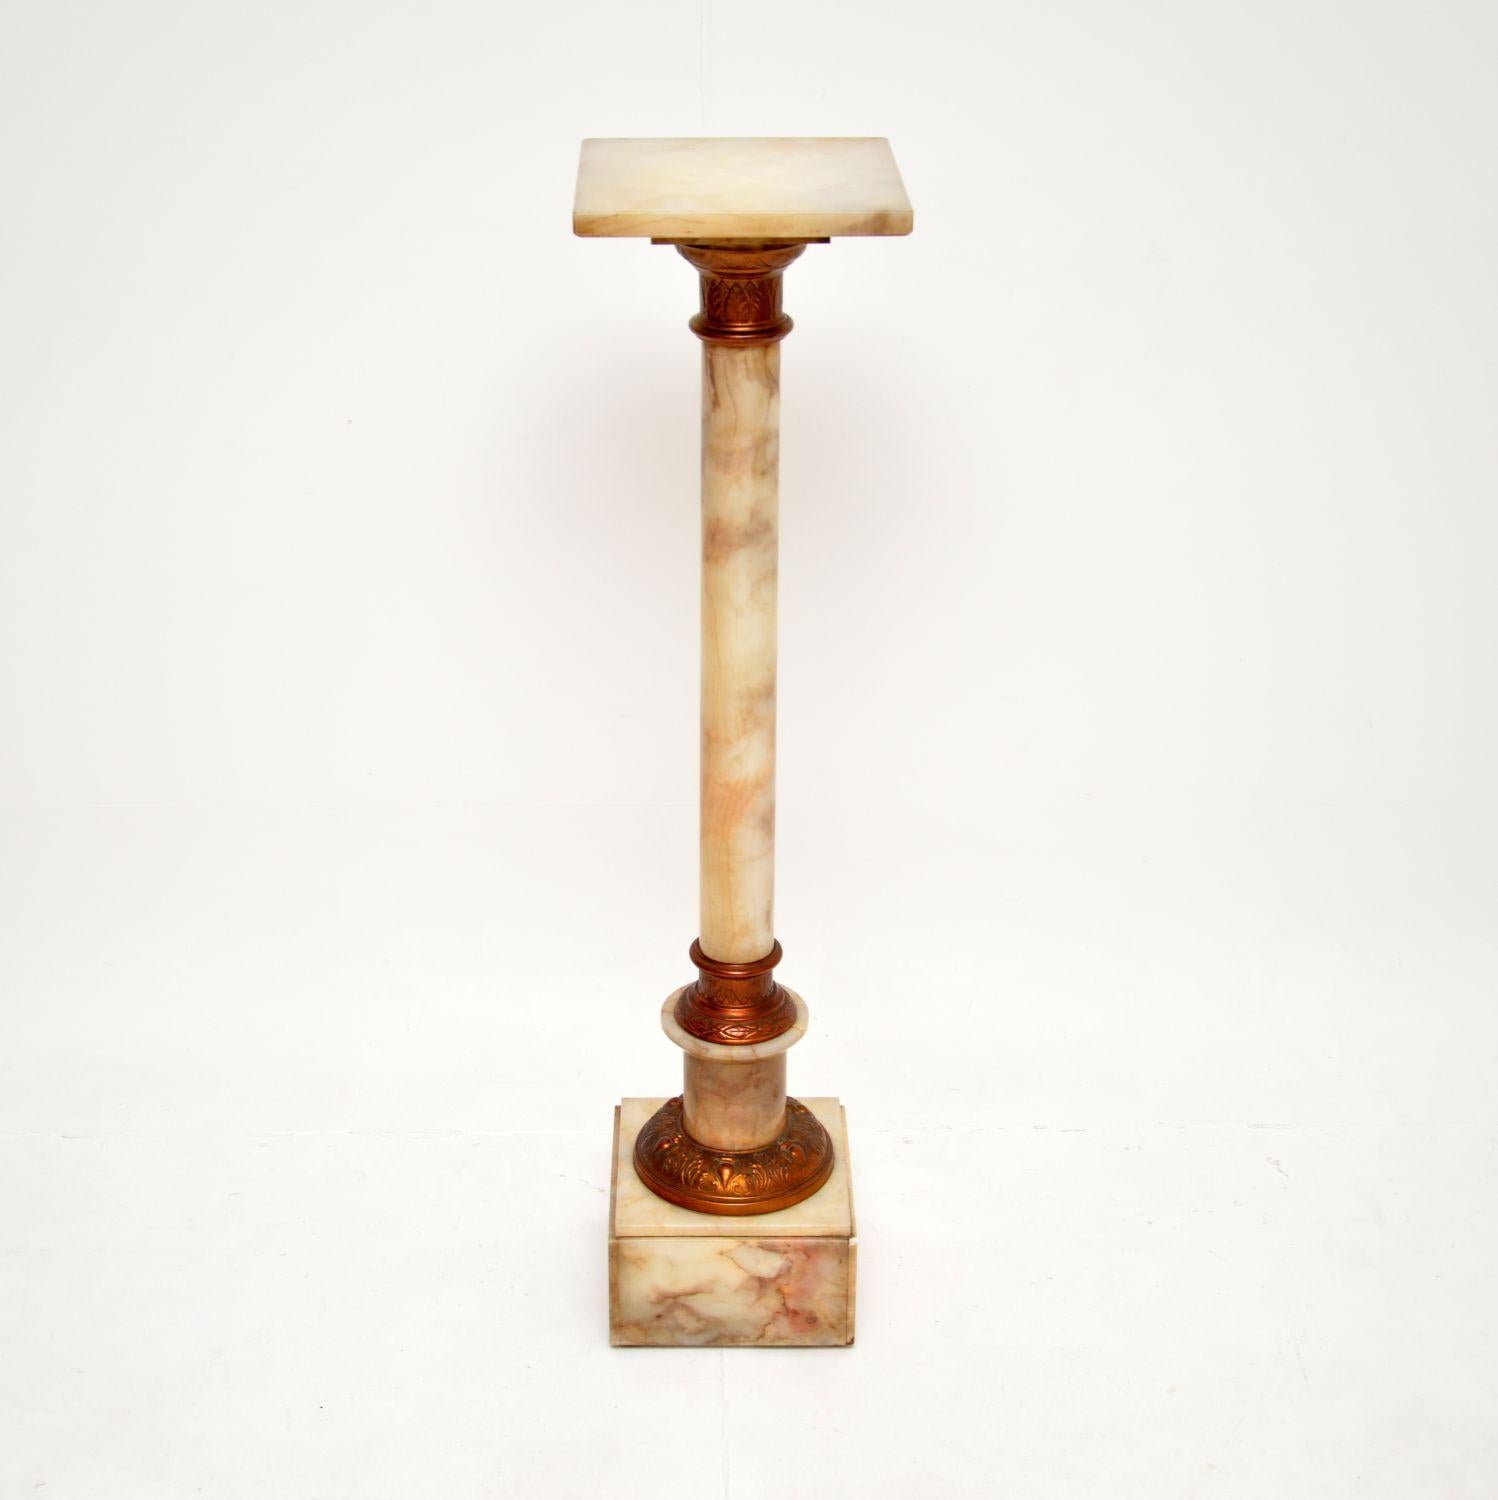 A beautiful and useful antique onyx and brass column. This was made in England, it dates from around the 1910 period.

It is of excellent quality, the onyx has gorgeous colours and swirling patterns. This has brass fixtures at the base and under the